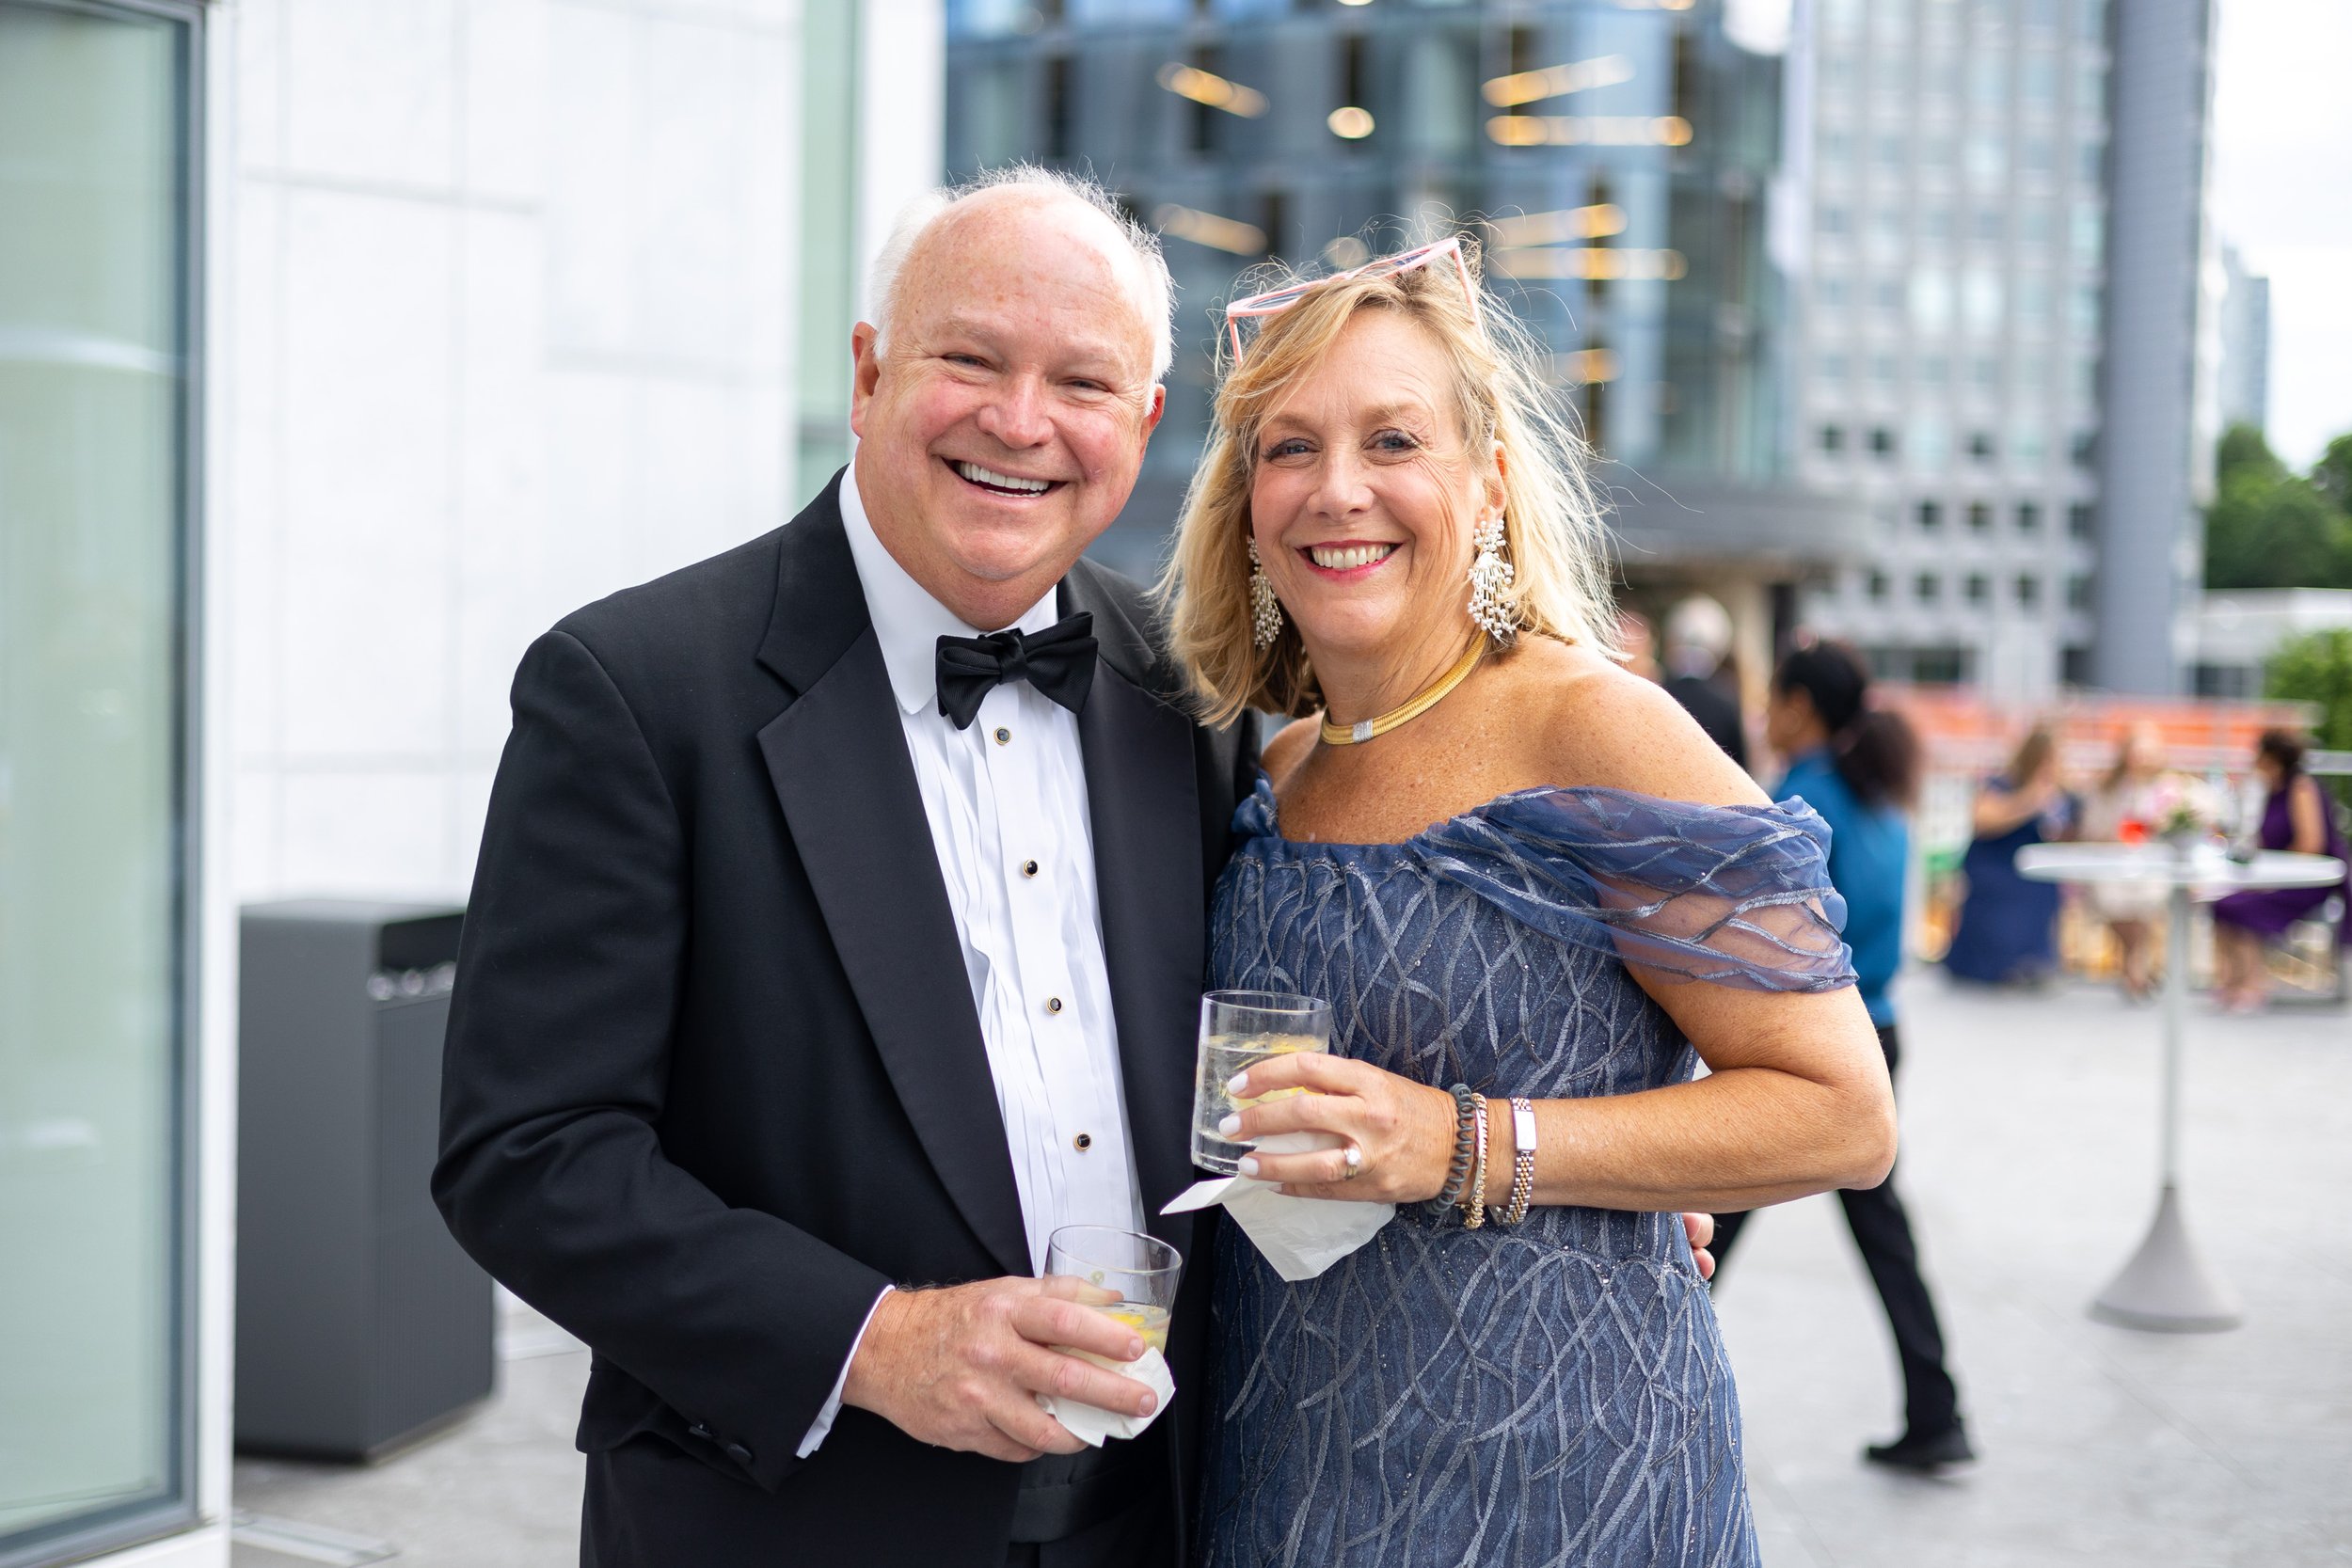 Husband in a tux and wife in a gown enjoy drinks on the balcony at Capital One Hall